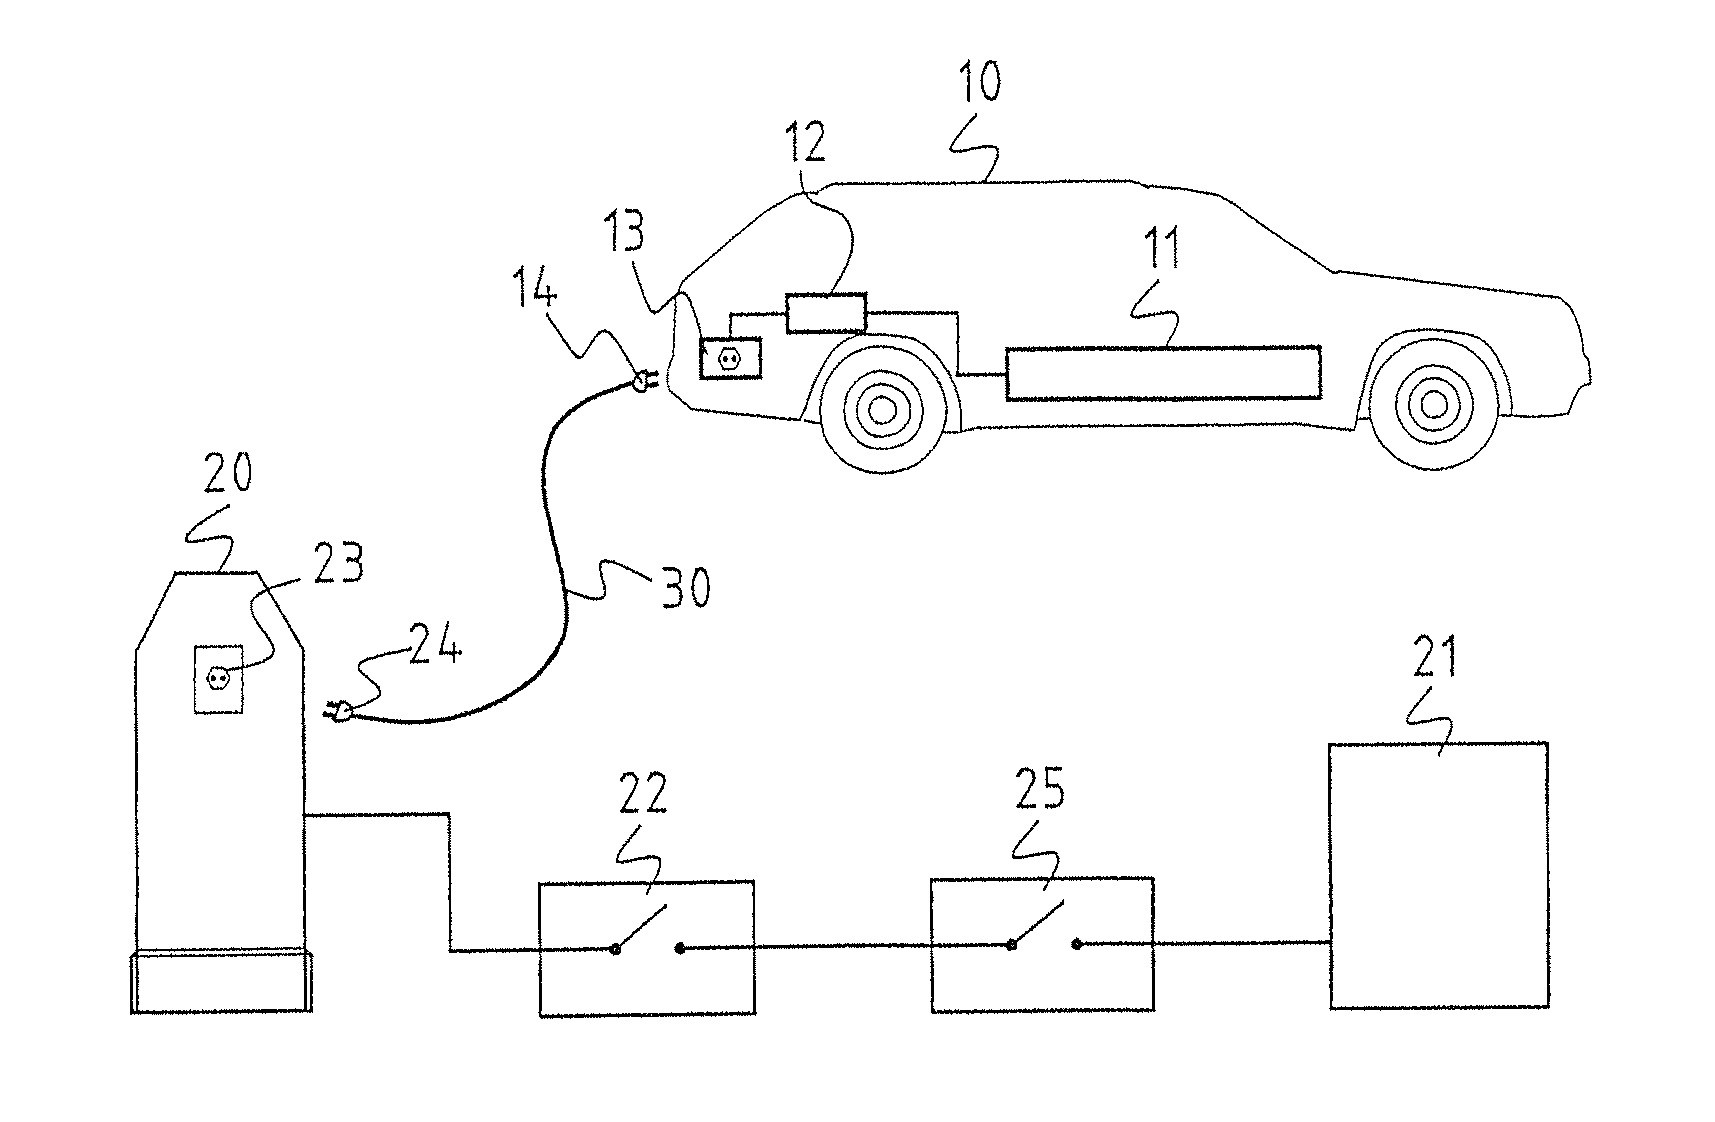 Charging cable connector for connecting an electric vehicle to a charging station